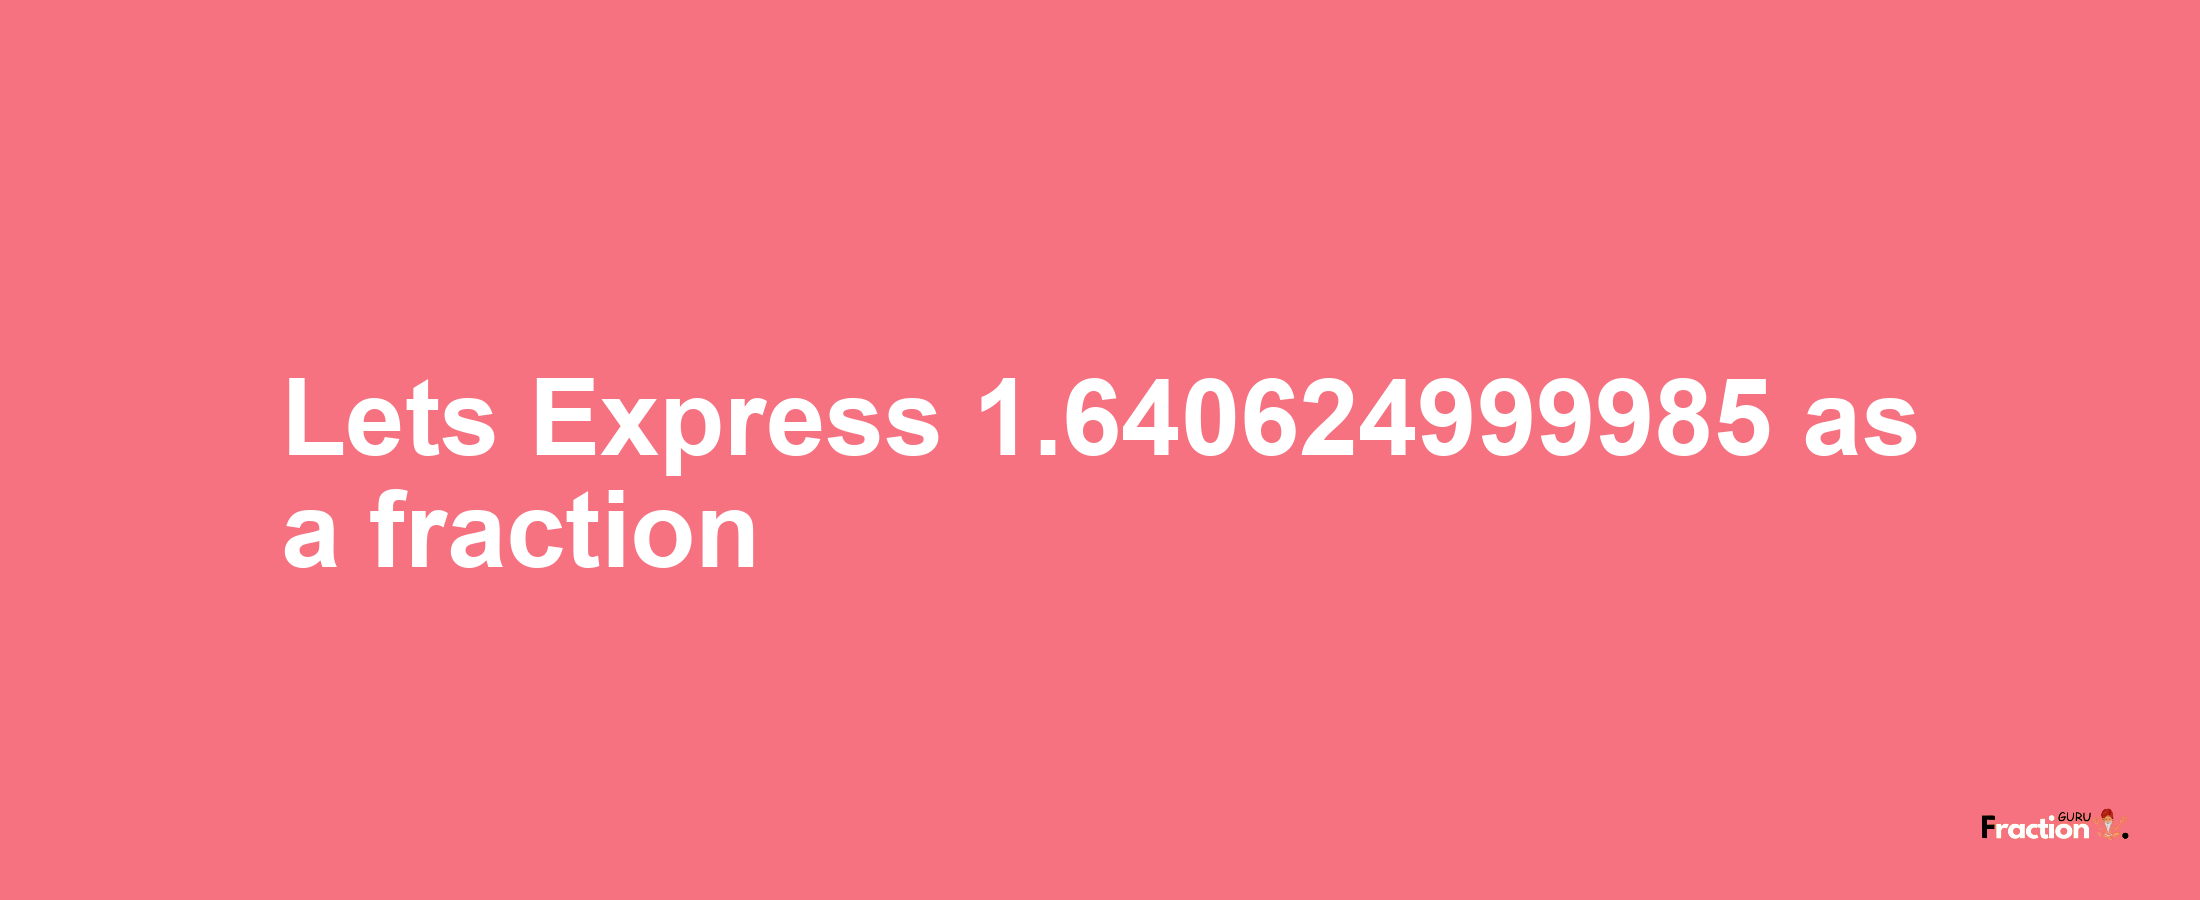 Lets Express 1.640624999985 as afraction